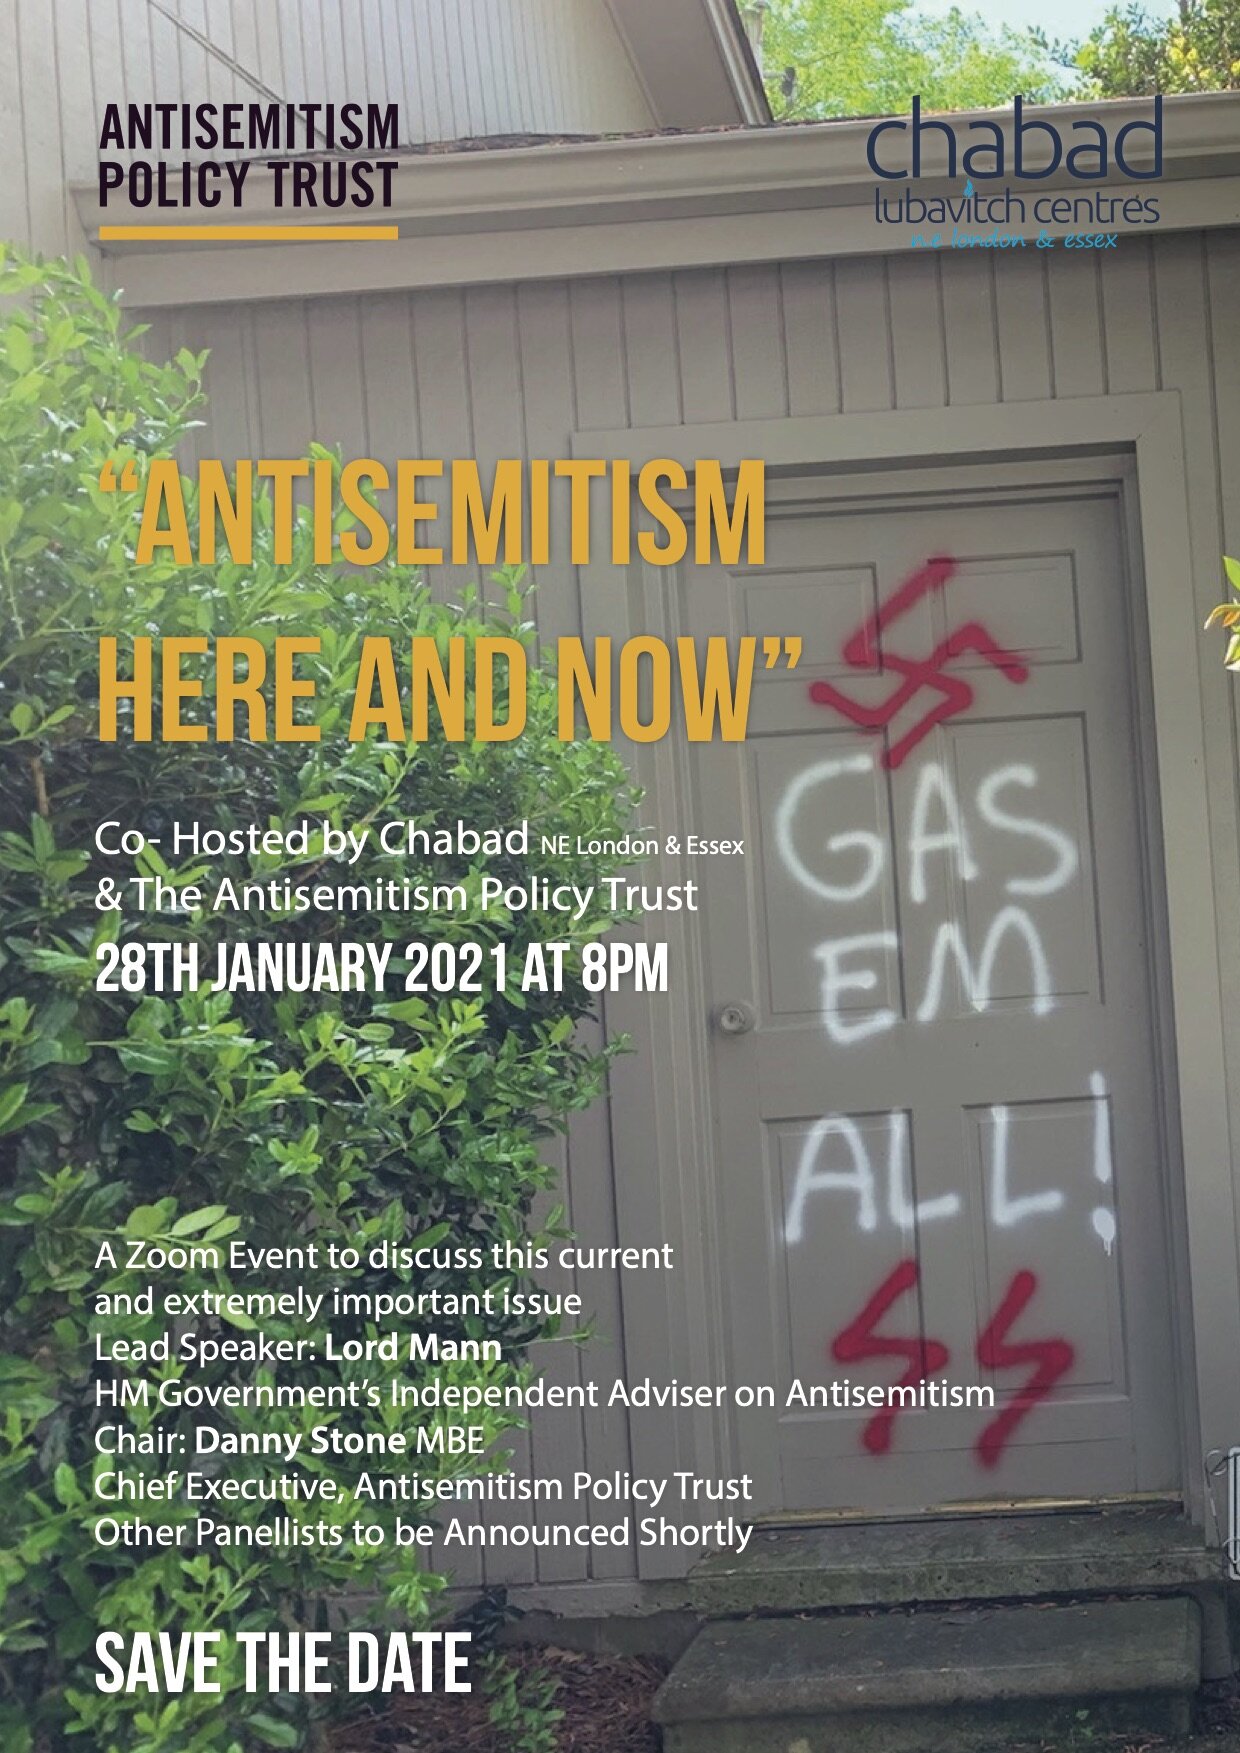 Antisem chabad here and now dec20.jpg